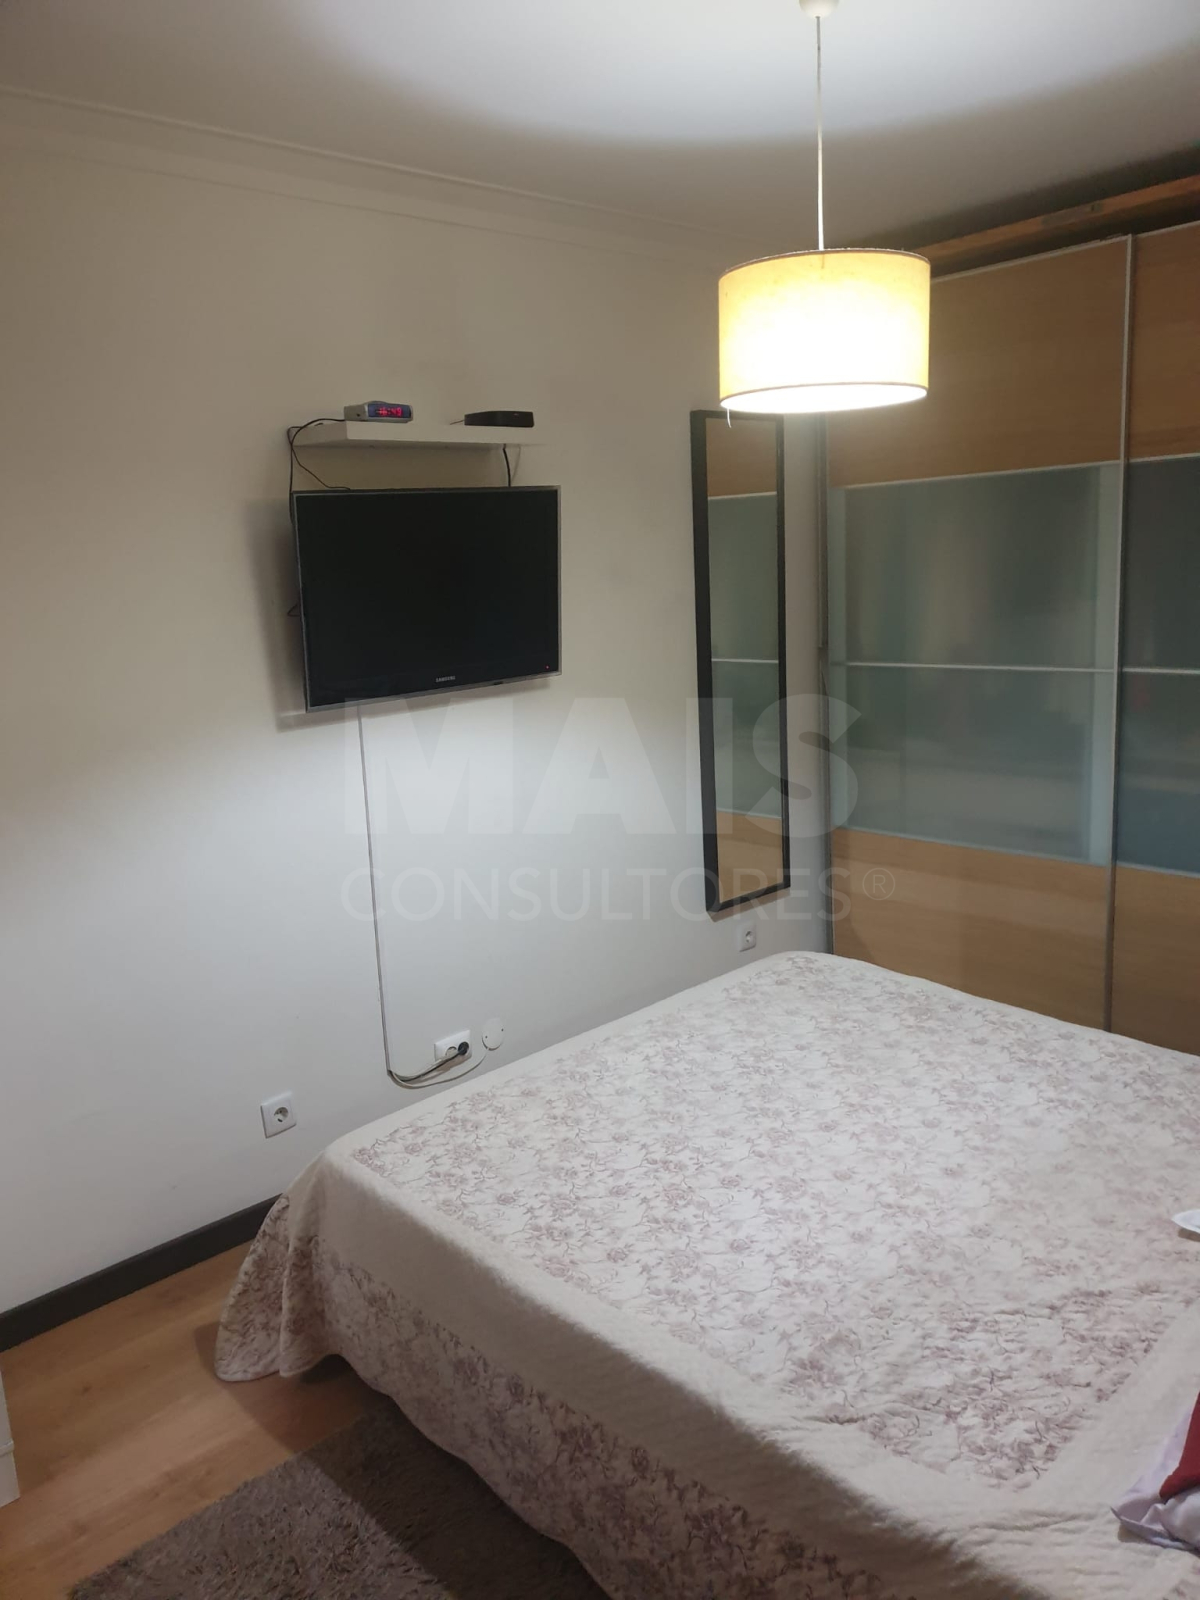 3 bedroom apartment in the center of Odivelas